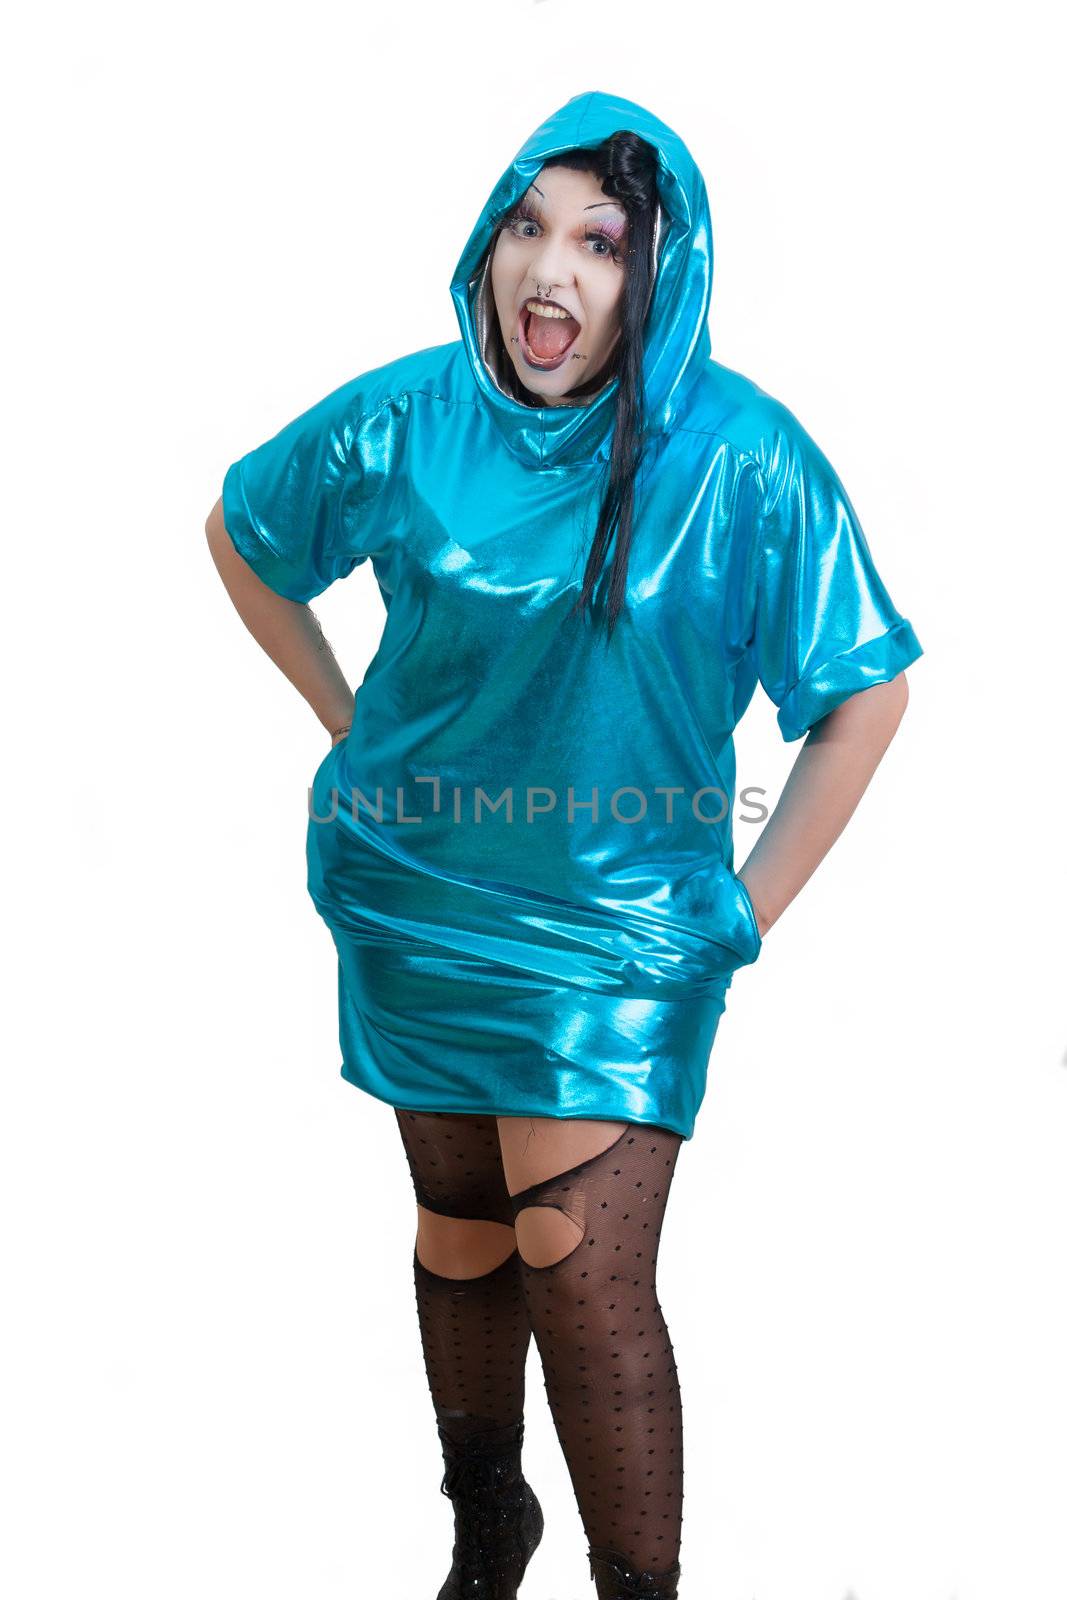 Screaming dark-haired woman with undercut hairstyle and piercings in her face wearing a blue shiny dress and broken nylons - all on white Background.